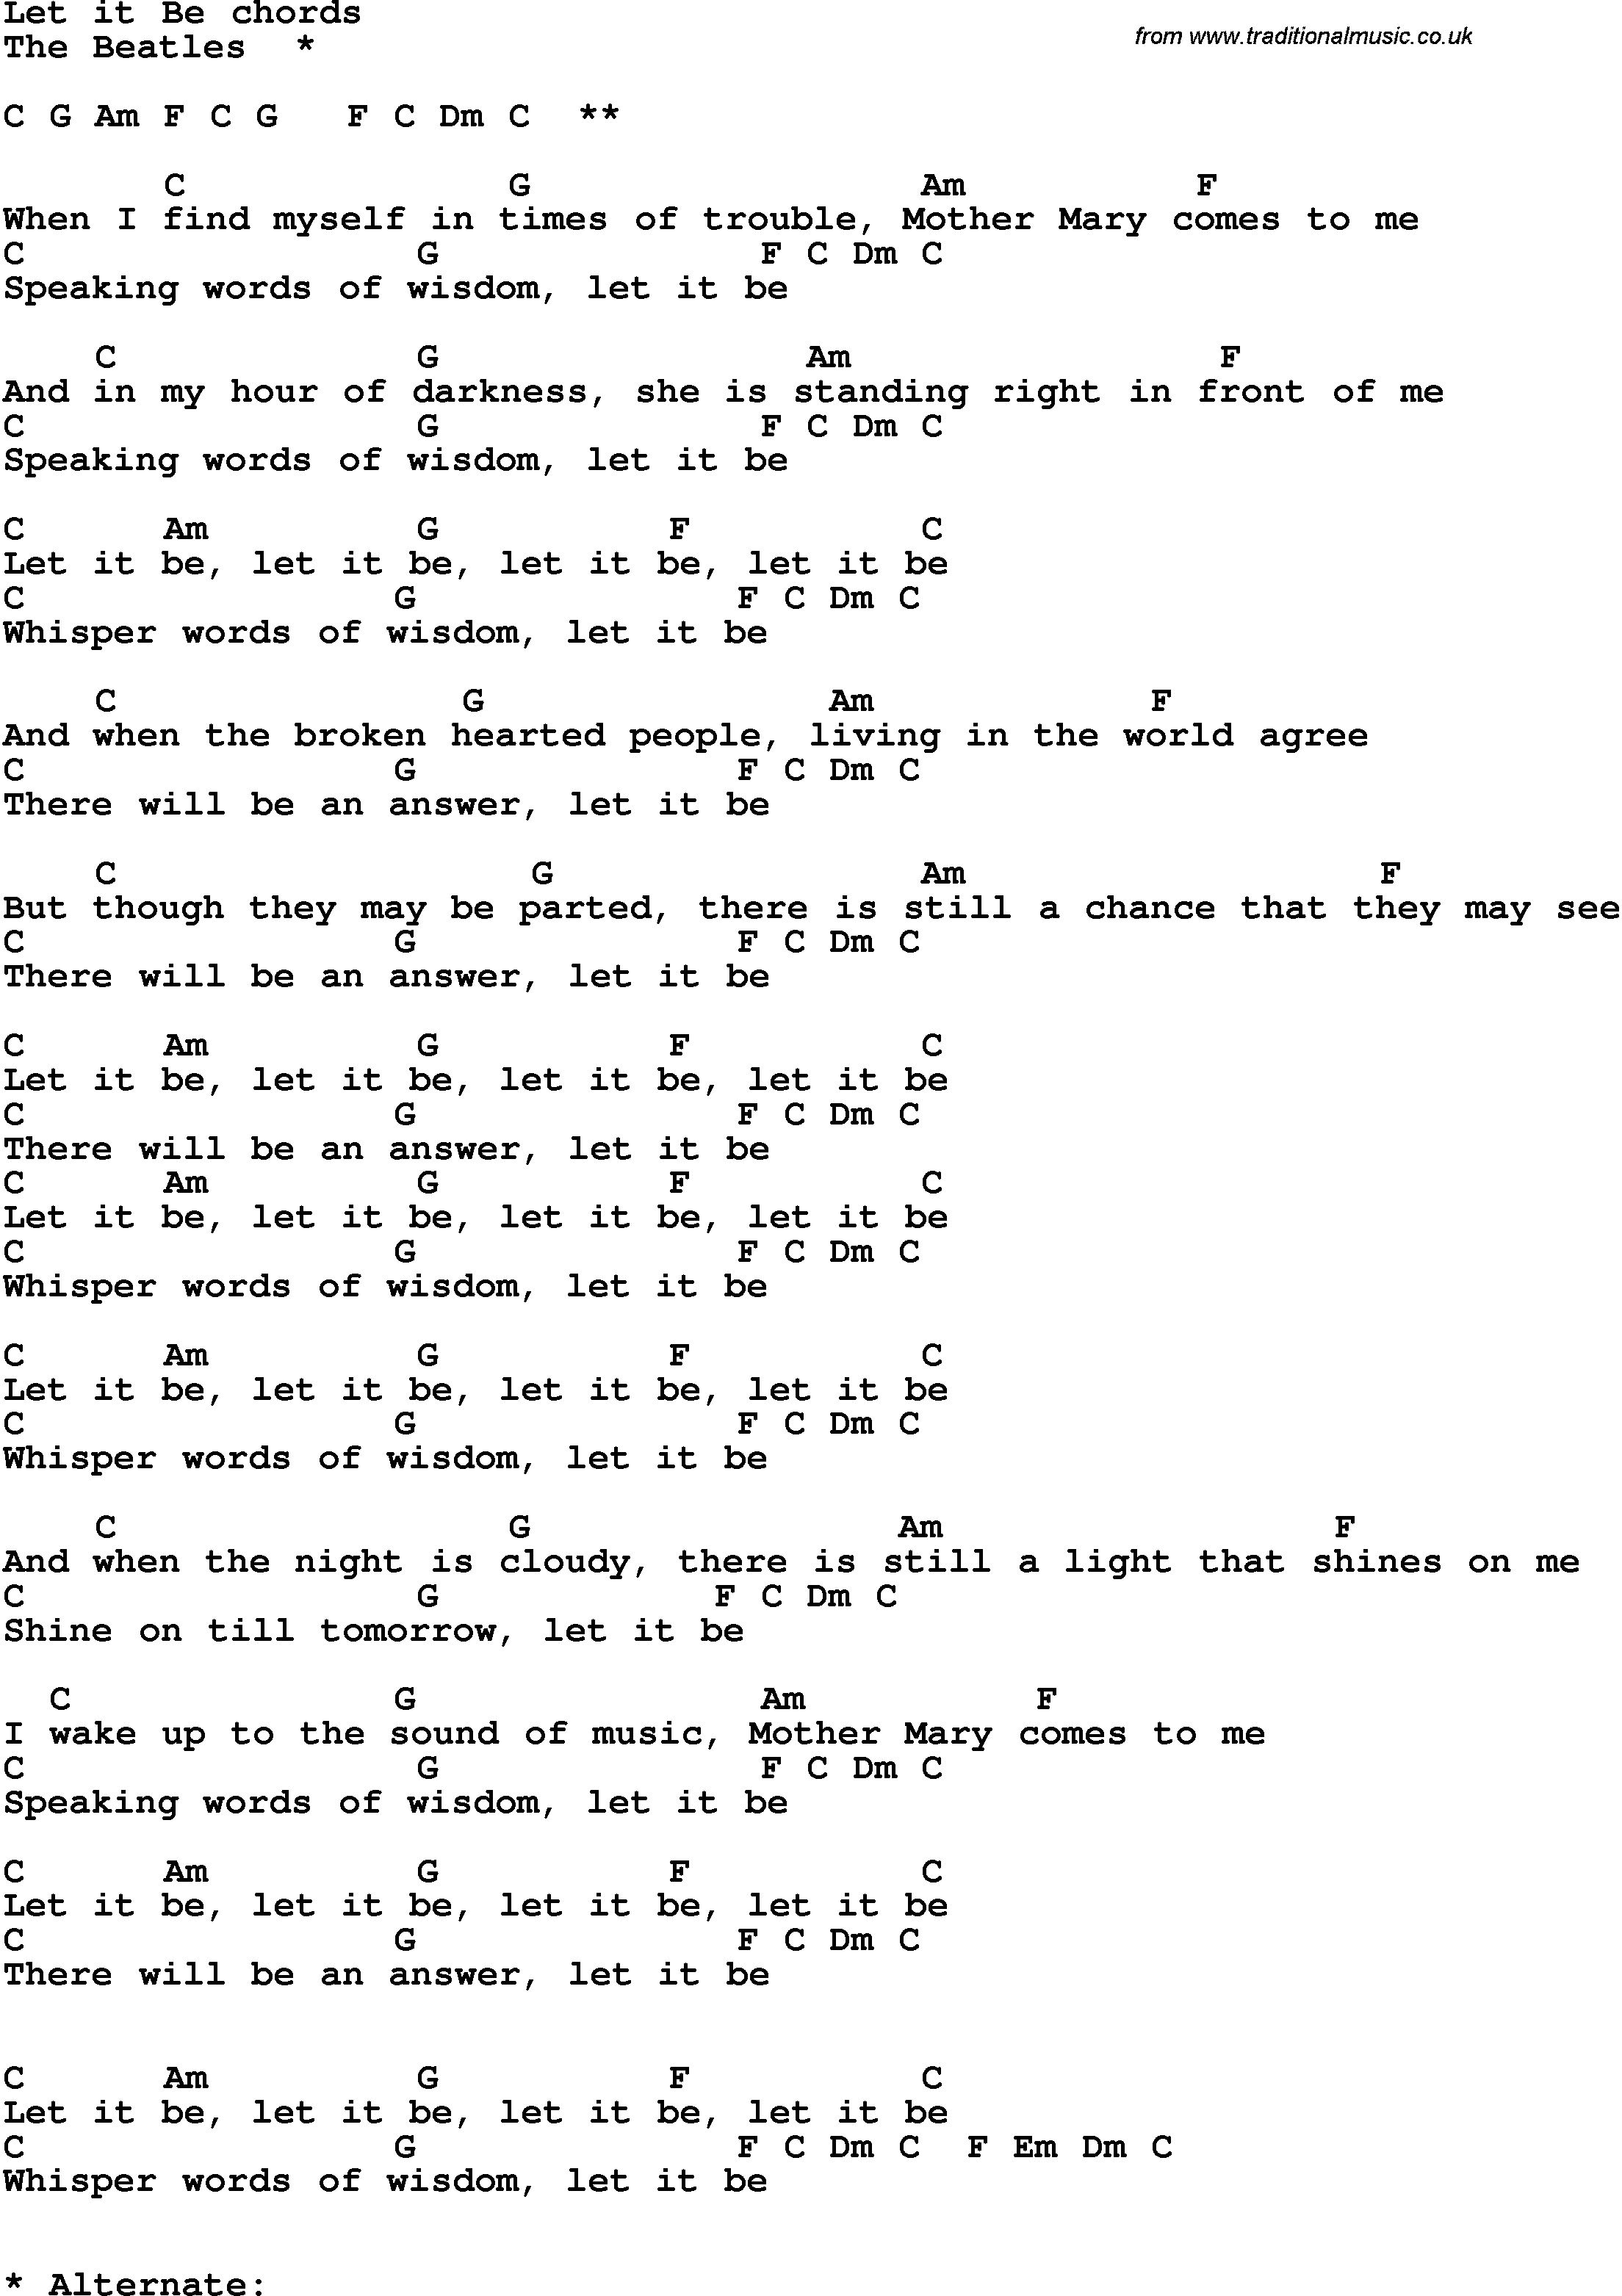 Song Lyrics with guitar chords for Let It Be - The Beatles